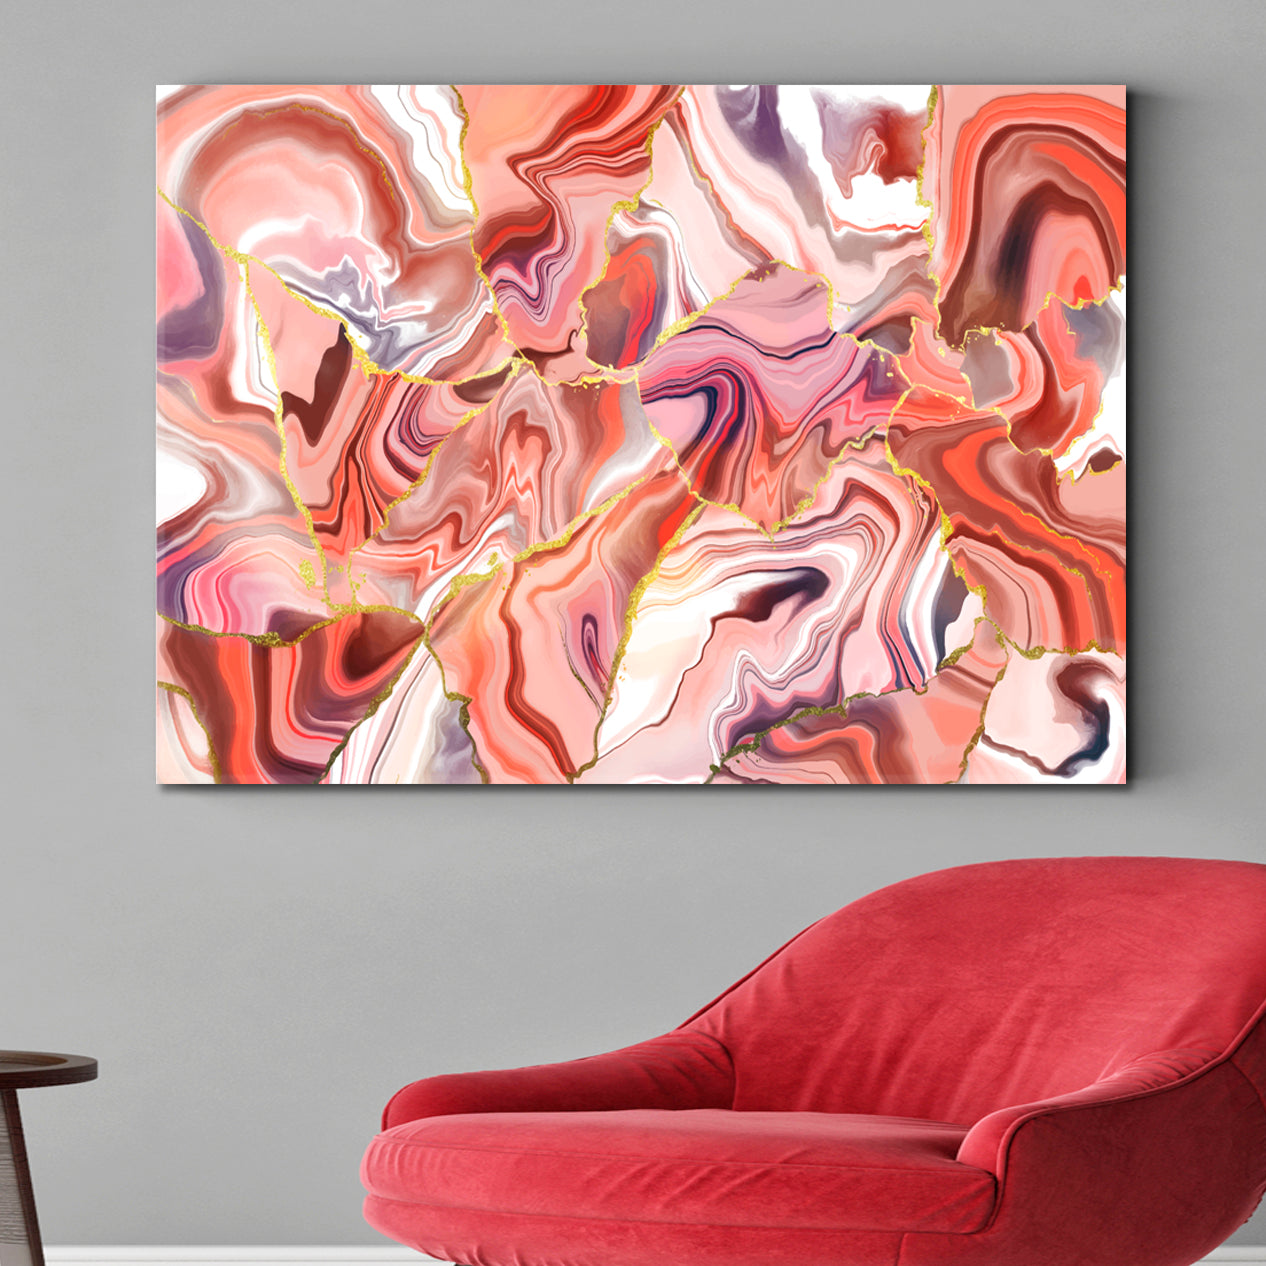 Coral Peachy Beige Mix Abstract Wavy Forms Fractal Futuristic Pattern Contemporary Art Artesty   